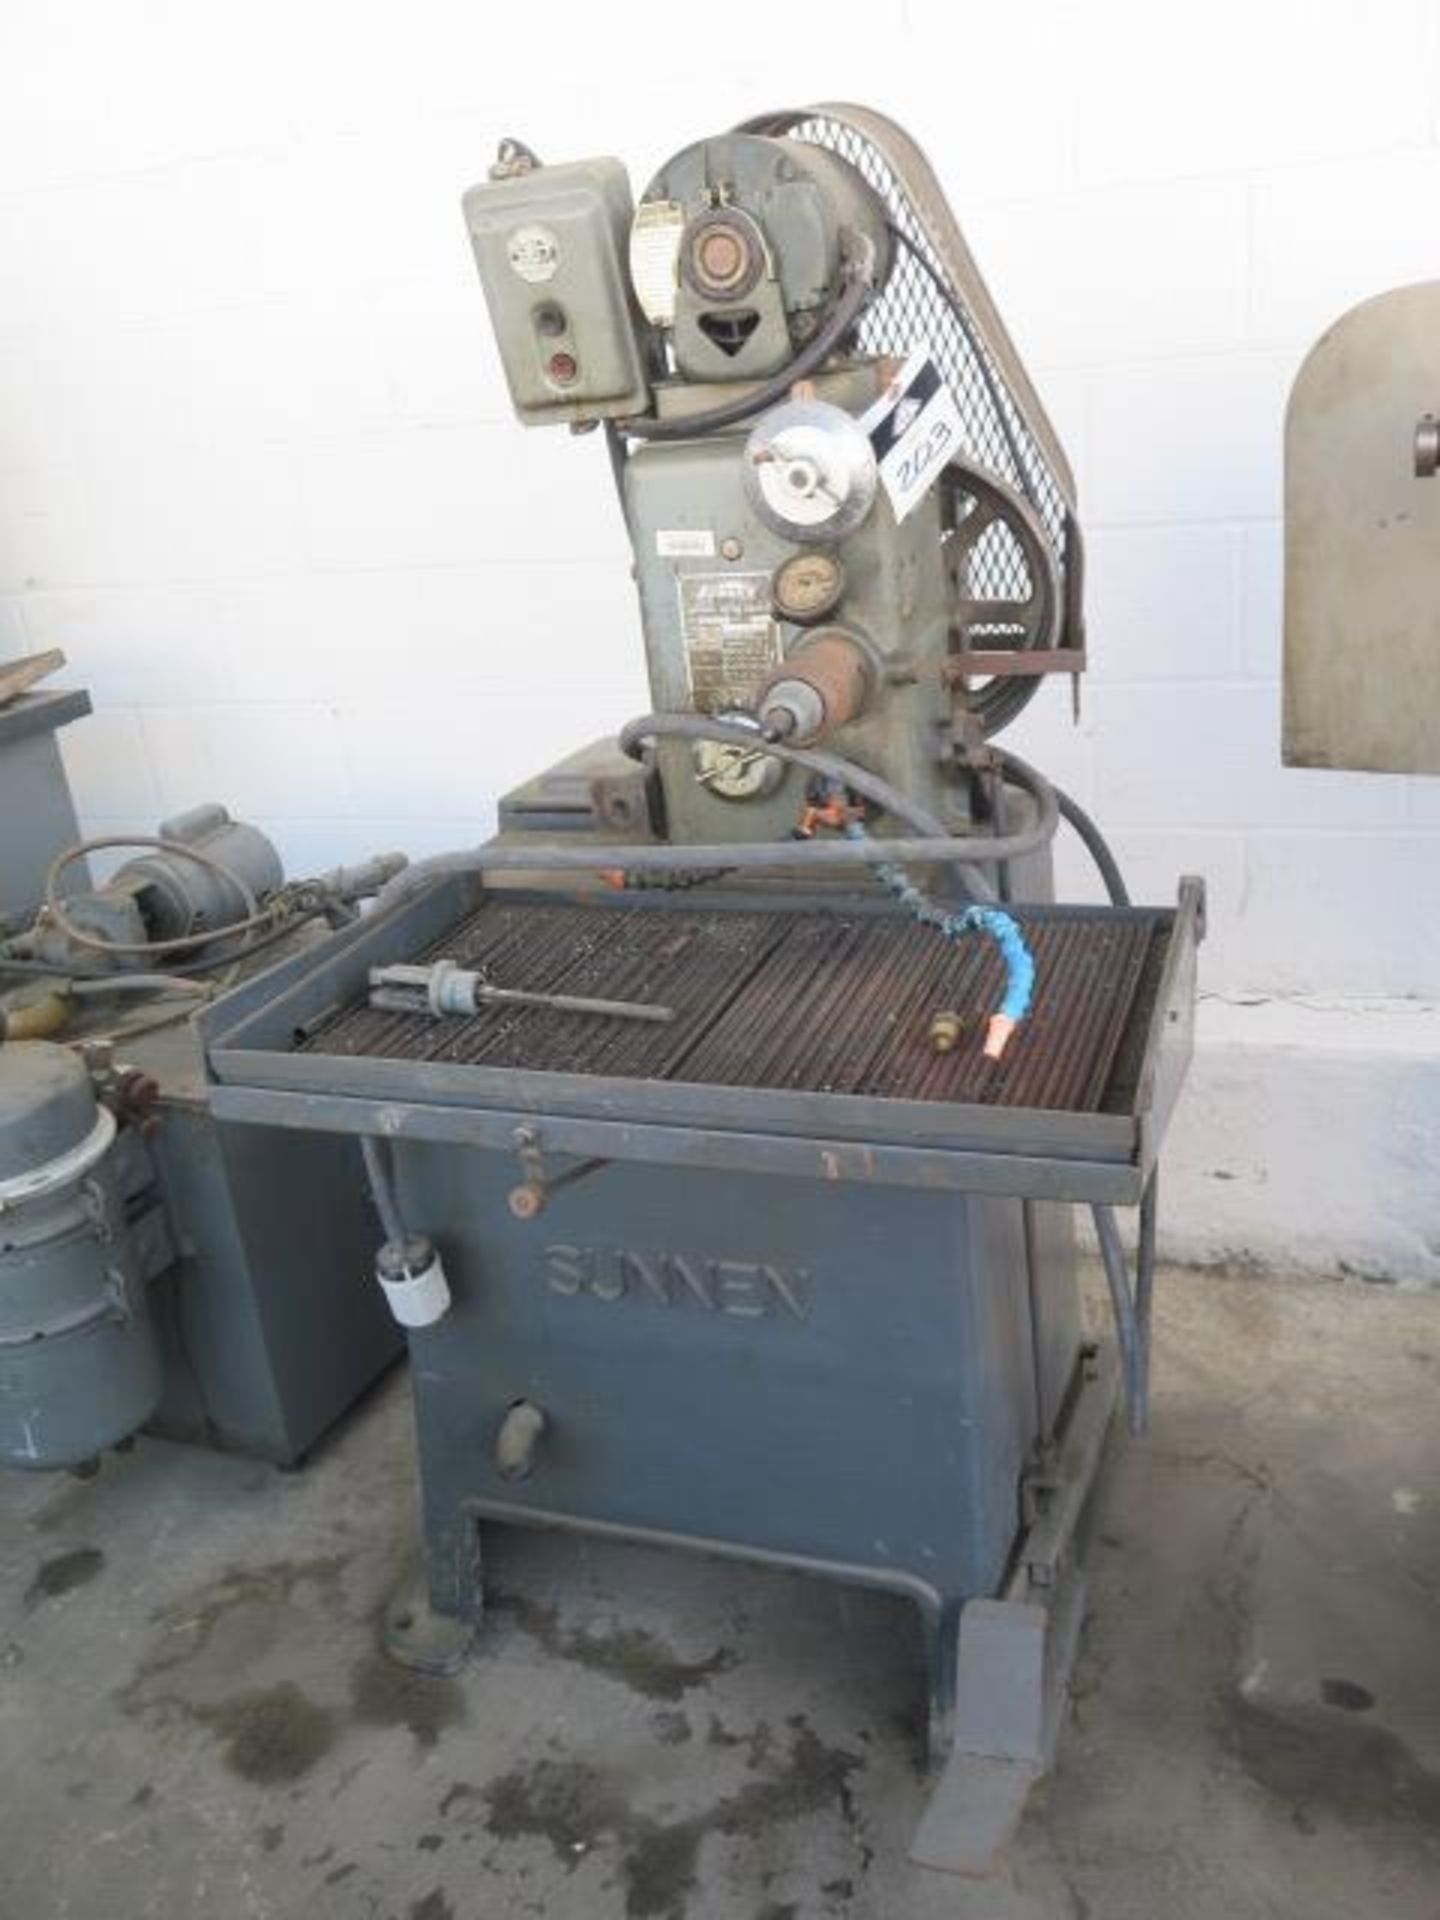 Sunnen mdl. MBB-1290 Honing Machine (SOLD AS-IS - NO WARRANTY)